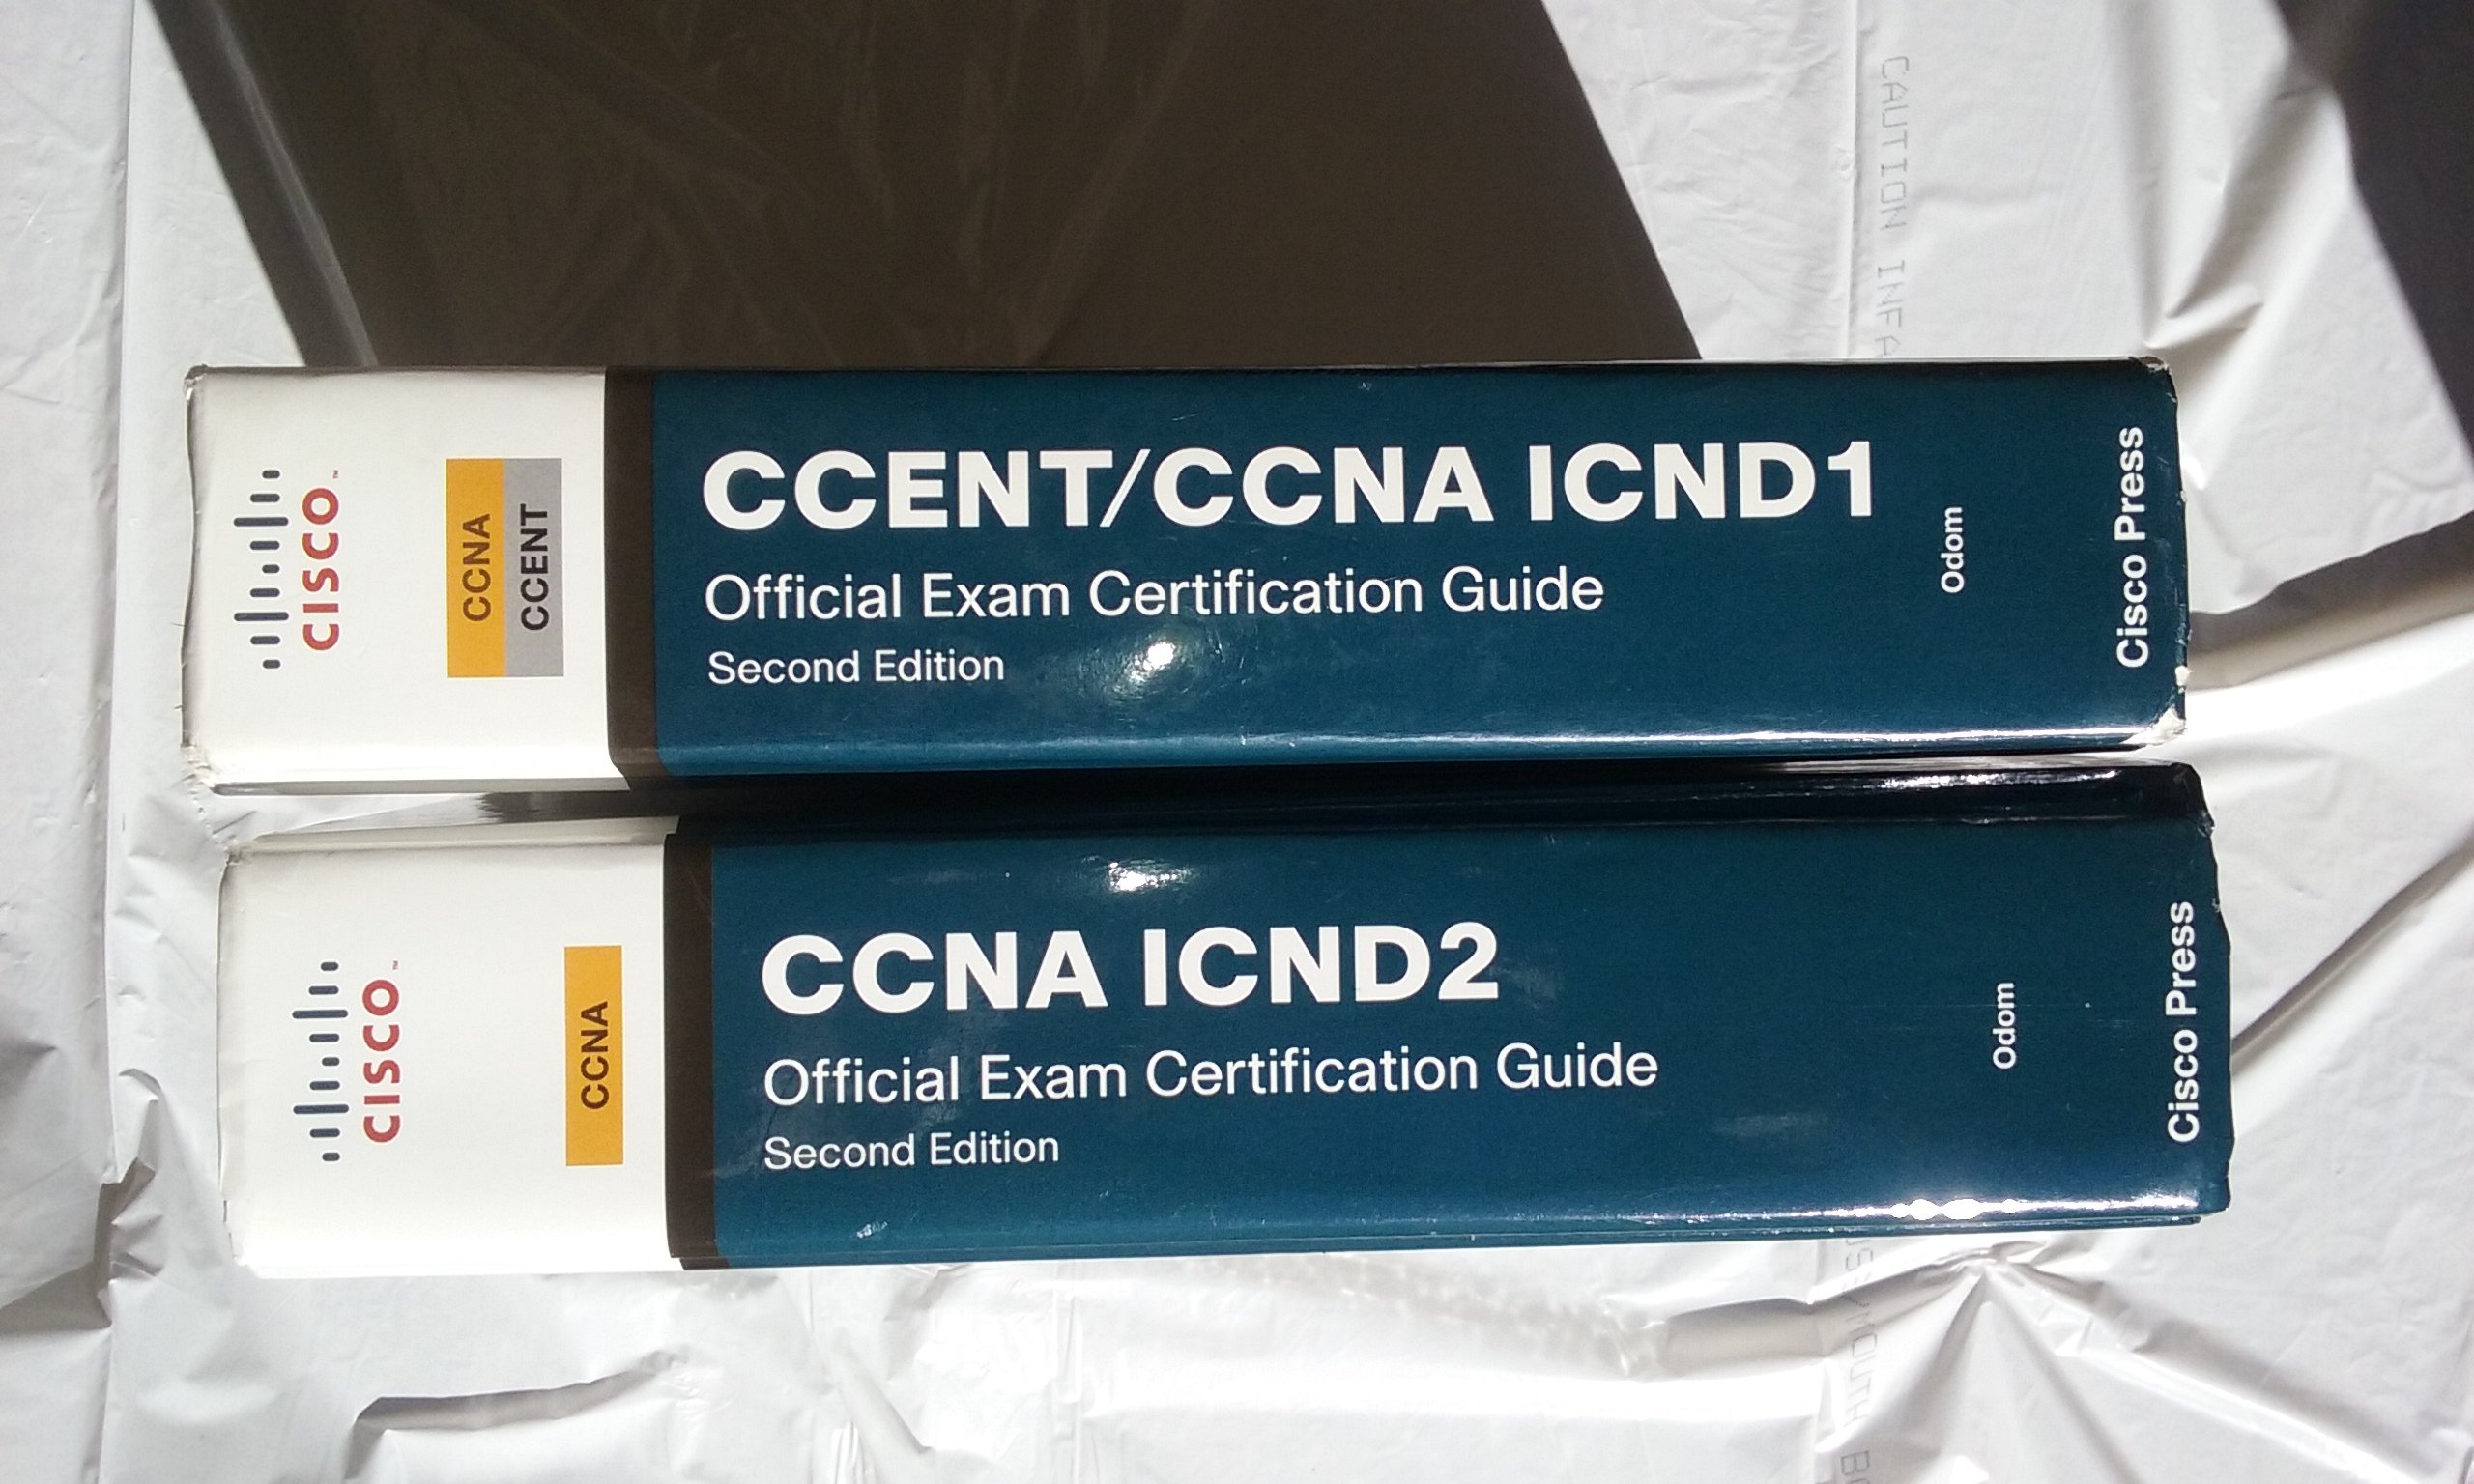 CCNA ICND2 Official Exam Certification Guide: CCNA Exams 640-816 and 640-802